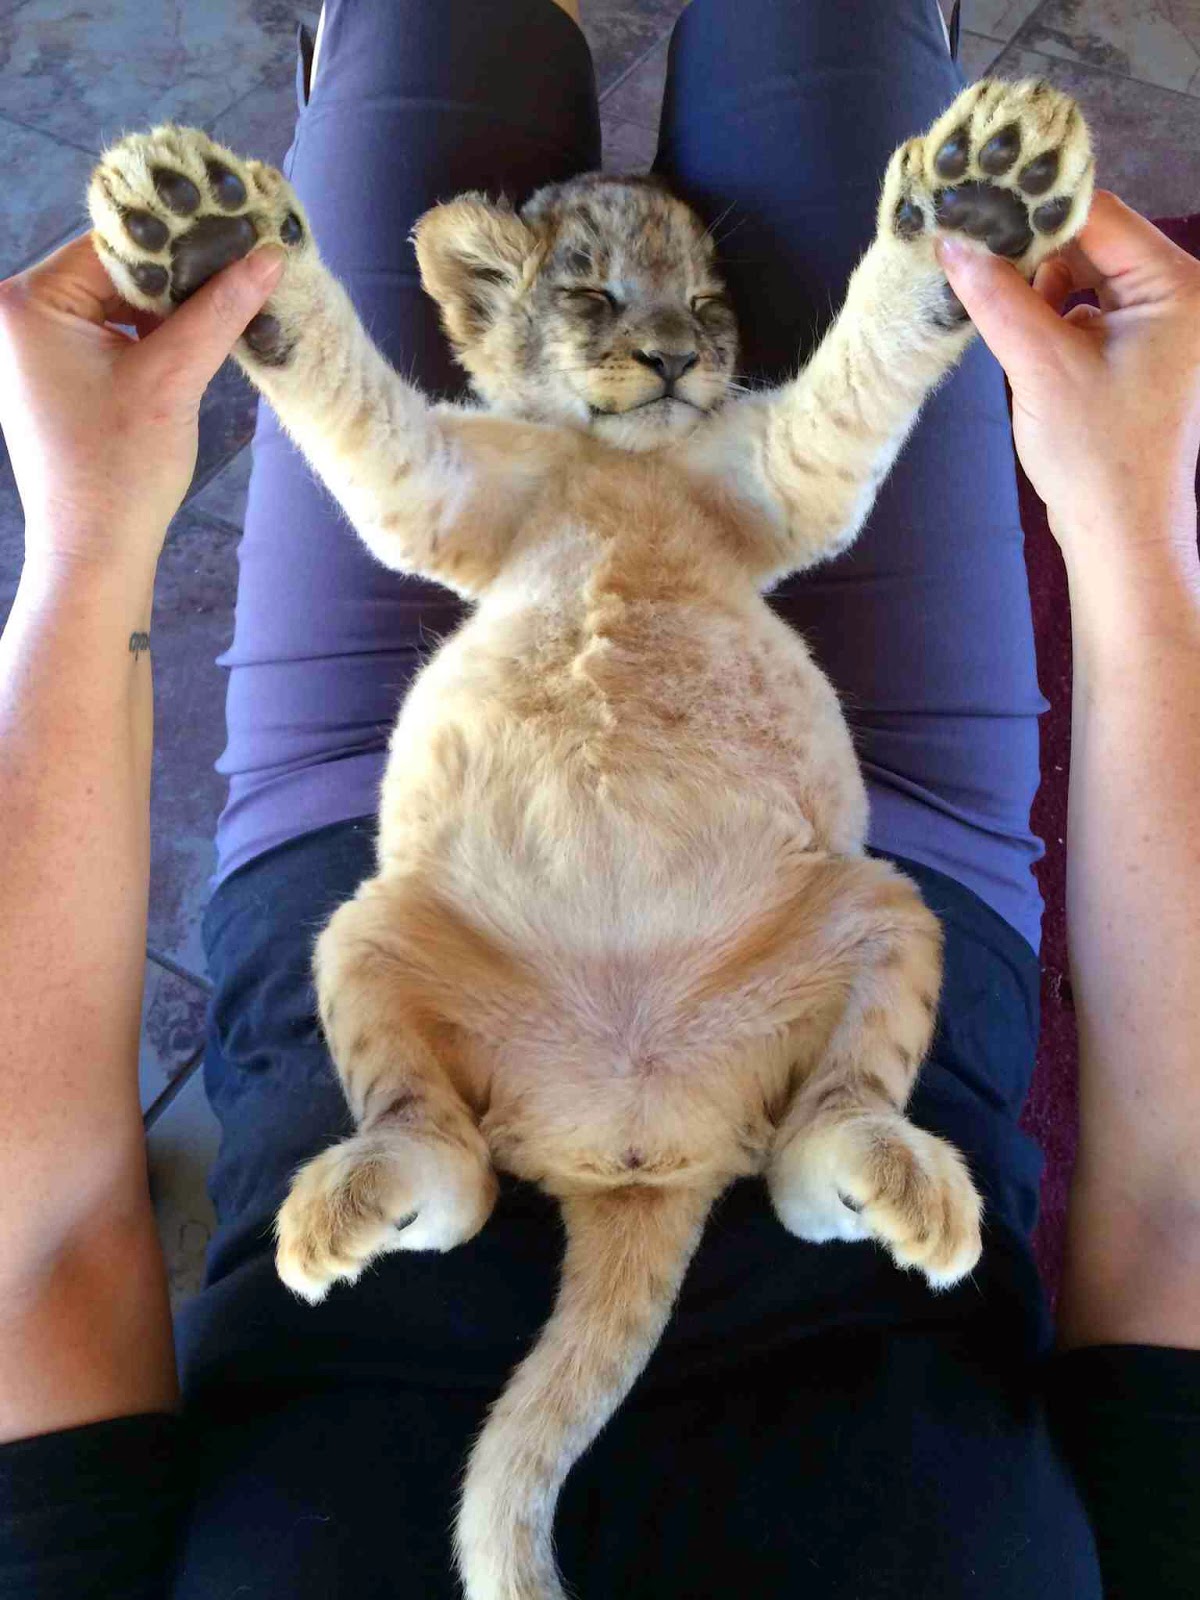 Funny animals of the week - 9 May 2014 (40 pics), cute animals, animal photos, baby lion sleeping on human lap